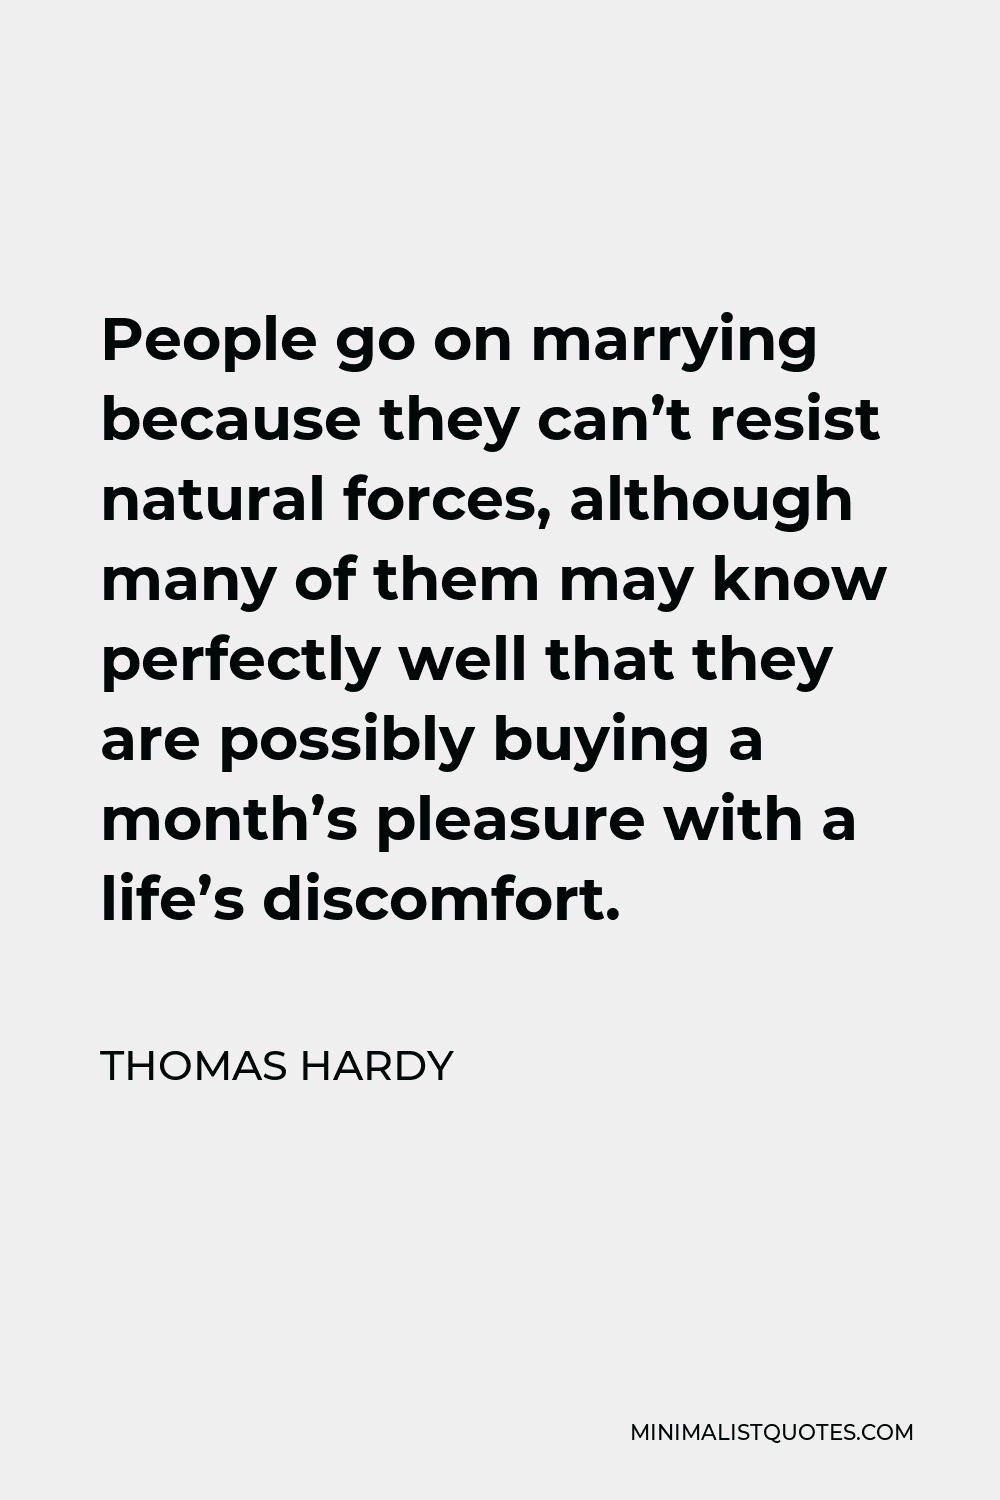 Thomas Hardy Quote - People go on marrying because they can’t resist natural forces, although many of them may know perfectly well that they are possibly buying a month’s pleasure with a life’s discomfort.